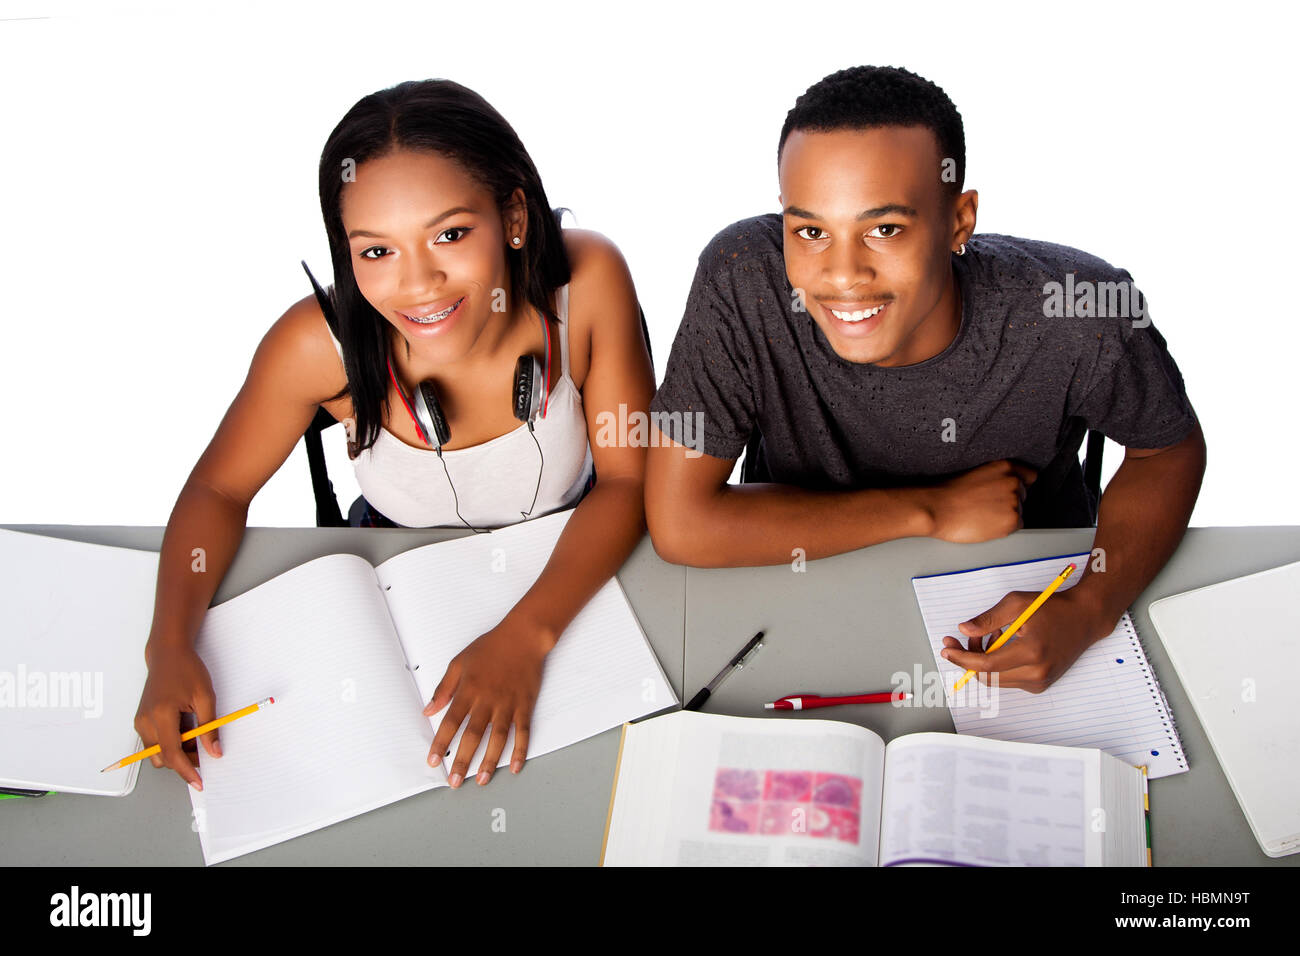 Two happy academic students studying together Stock Photo